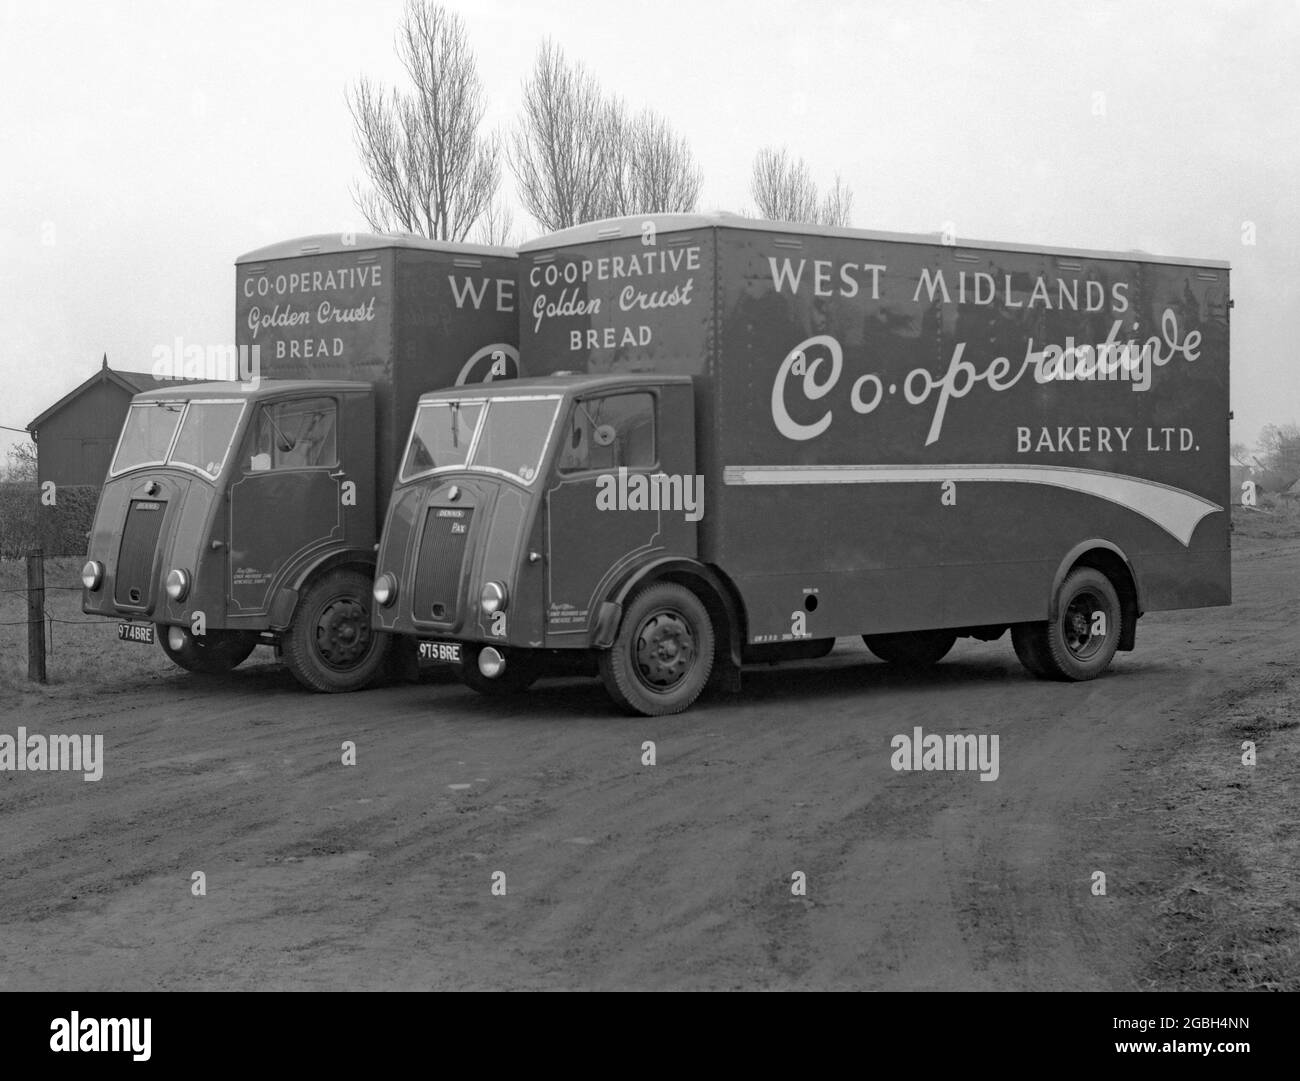 Two Dennis Pax delivery vans used for bread delivery for the West Midlands Co-operative Society bakery c.1955 – the vehicles were based at Newcastle, Staffordshire, England, UK. Dennis Brothers was founded in 1895 by the brothers Dennis brothers. The company made its first bus in 1903 and their first fire engine in 1908. The Pax chassis was introduced in 1952. The Co-operative Group (Co-op) has developed over the years from the merger of co-operative wholesale societies and many independent retail societies. Individual societies joined up to form the 'Co-operative Wholesale Society' (CWS). Stock Photo